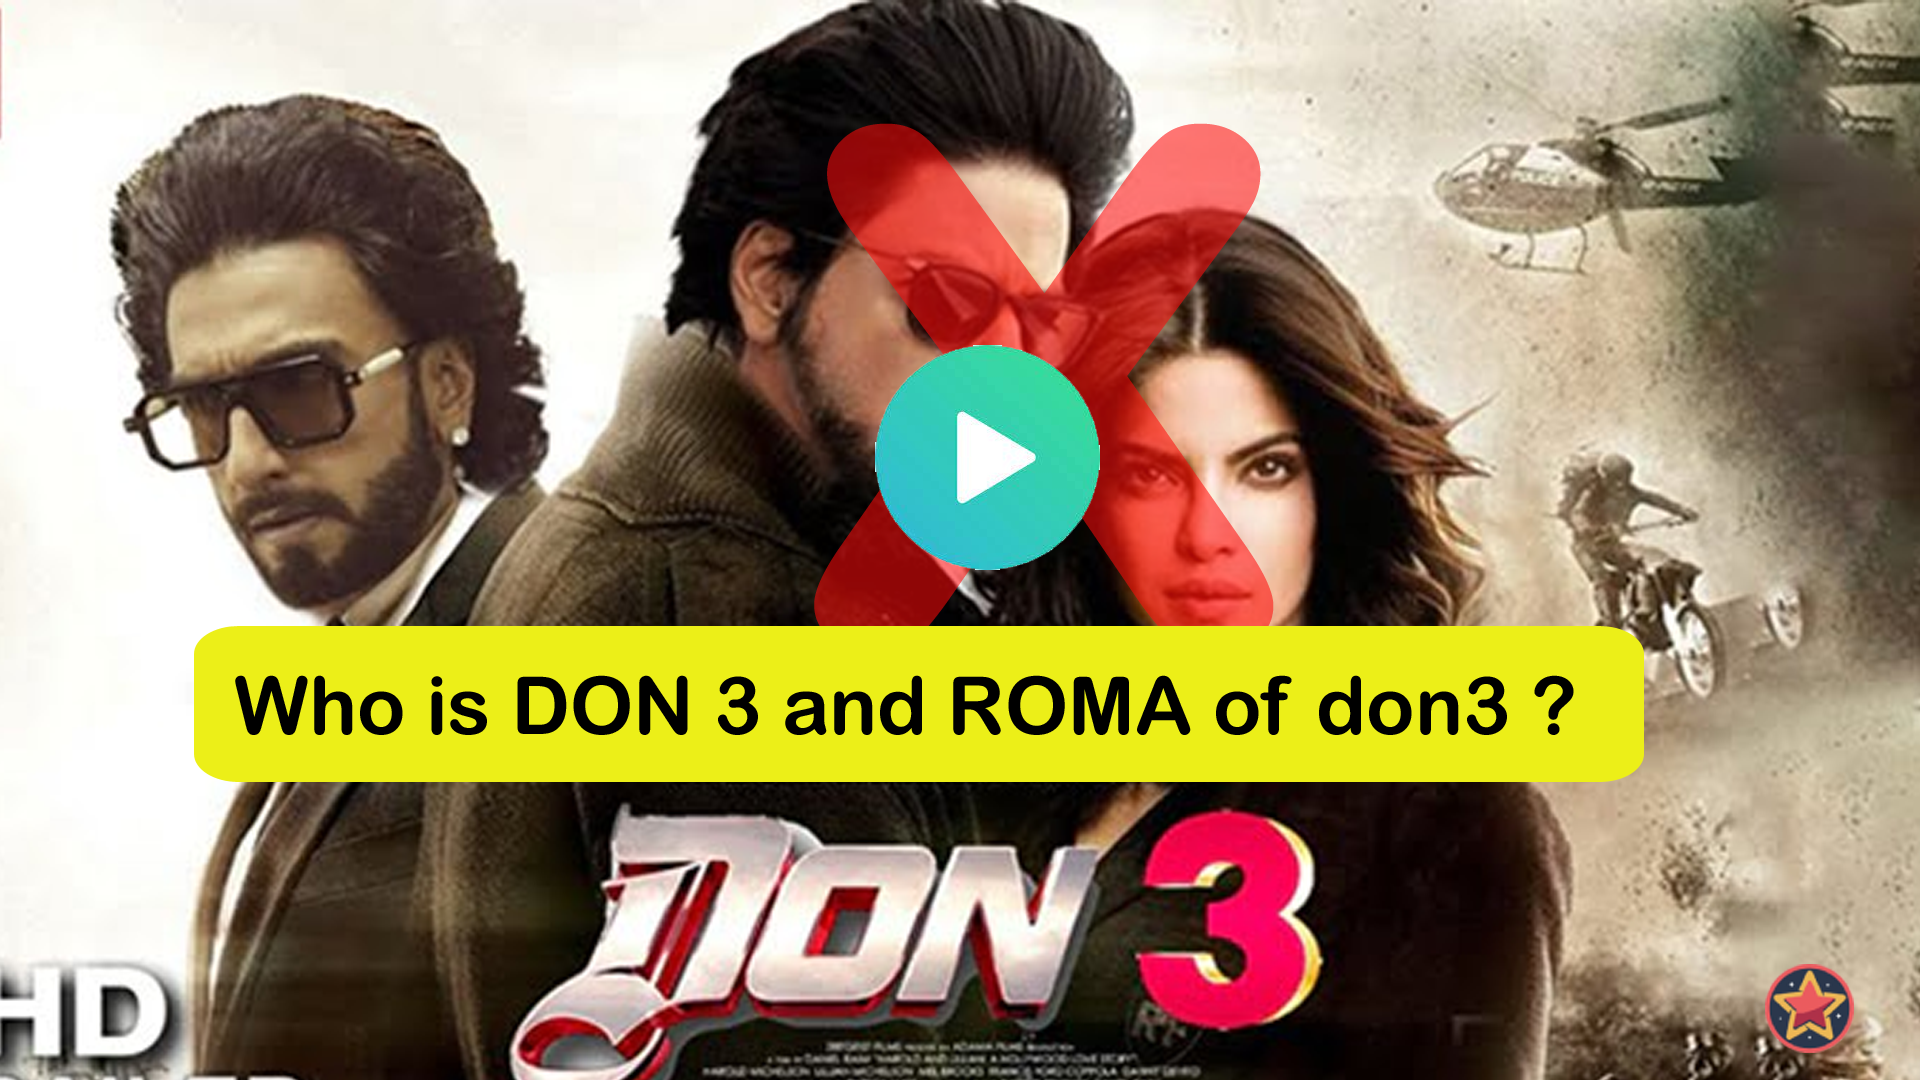 Shah Rukh Khan exits don 3? Now Ranveer will be 'DON' and Kiara will be 'ROMA'